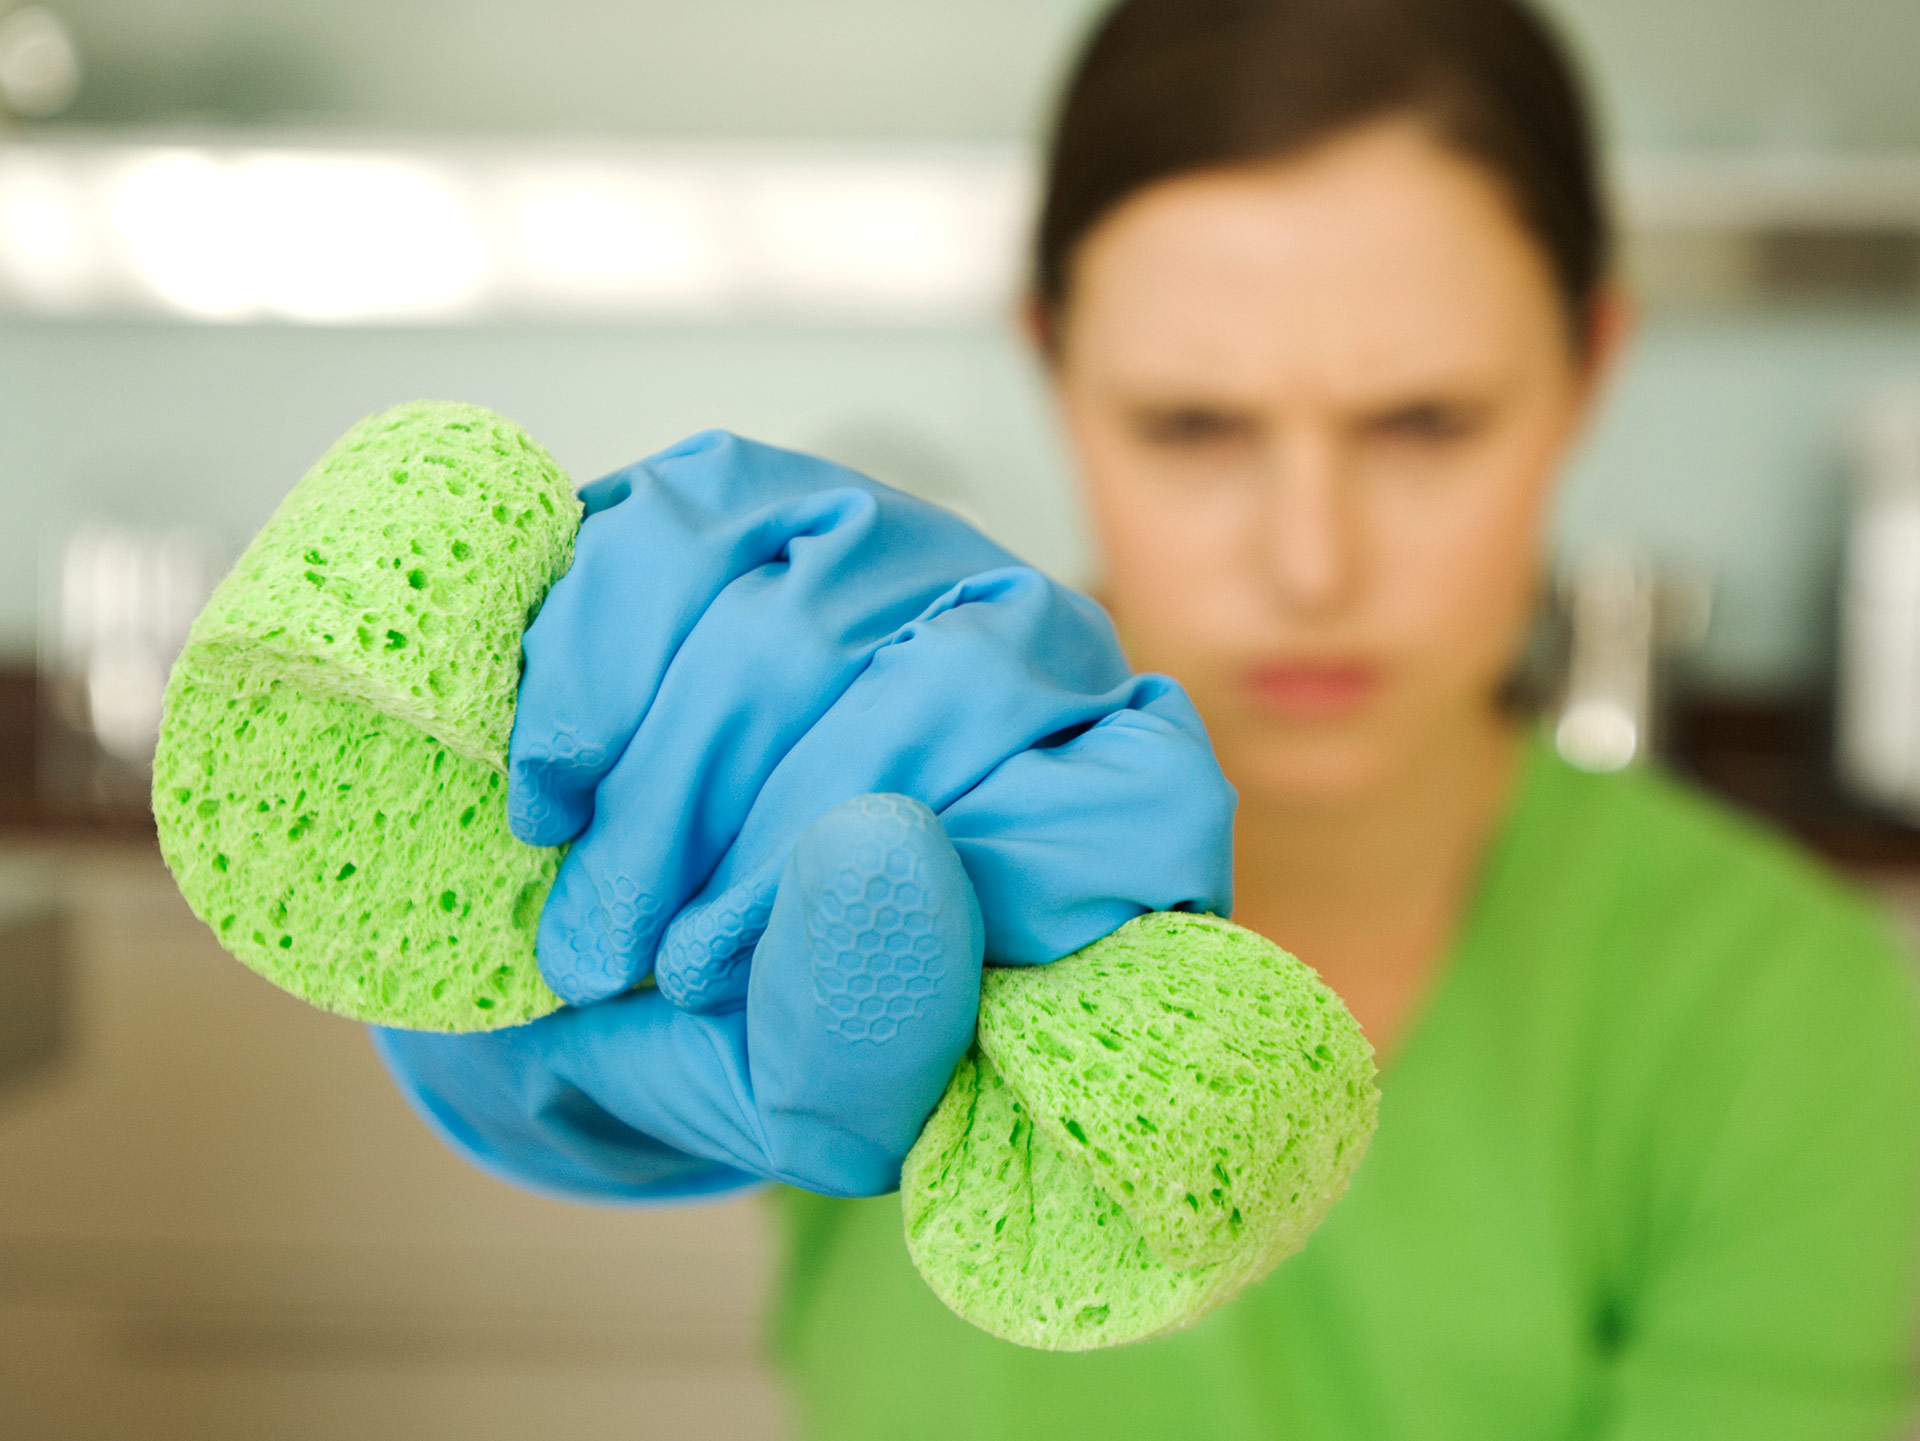 Science says your kitchen sponge is disgusting and cleaning it won’t help